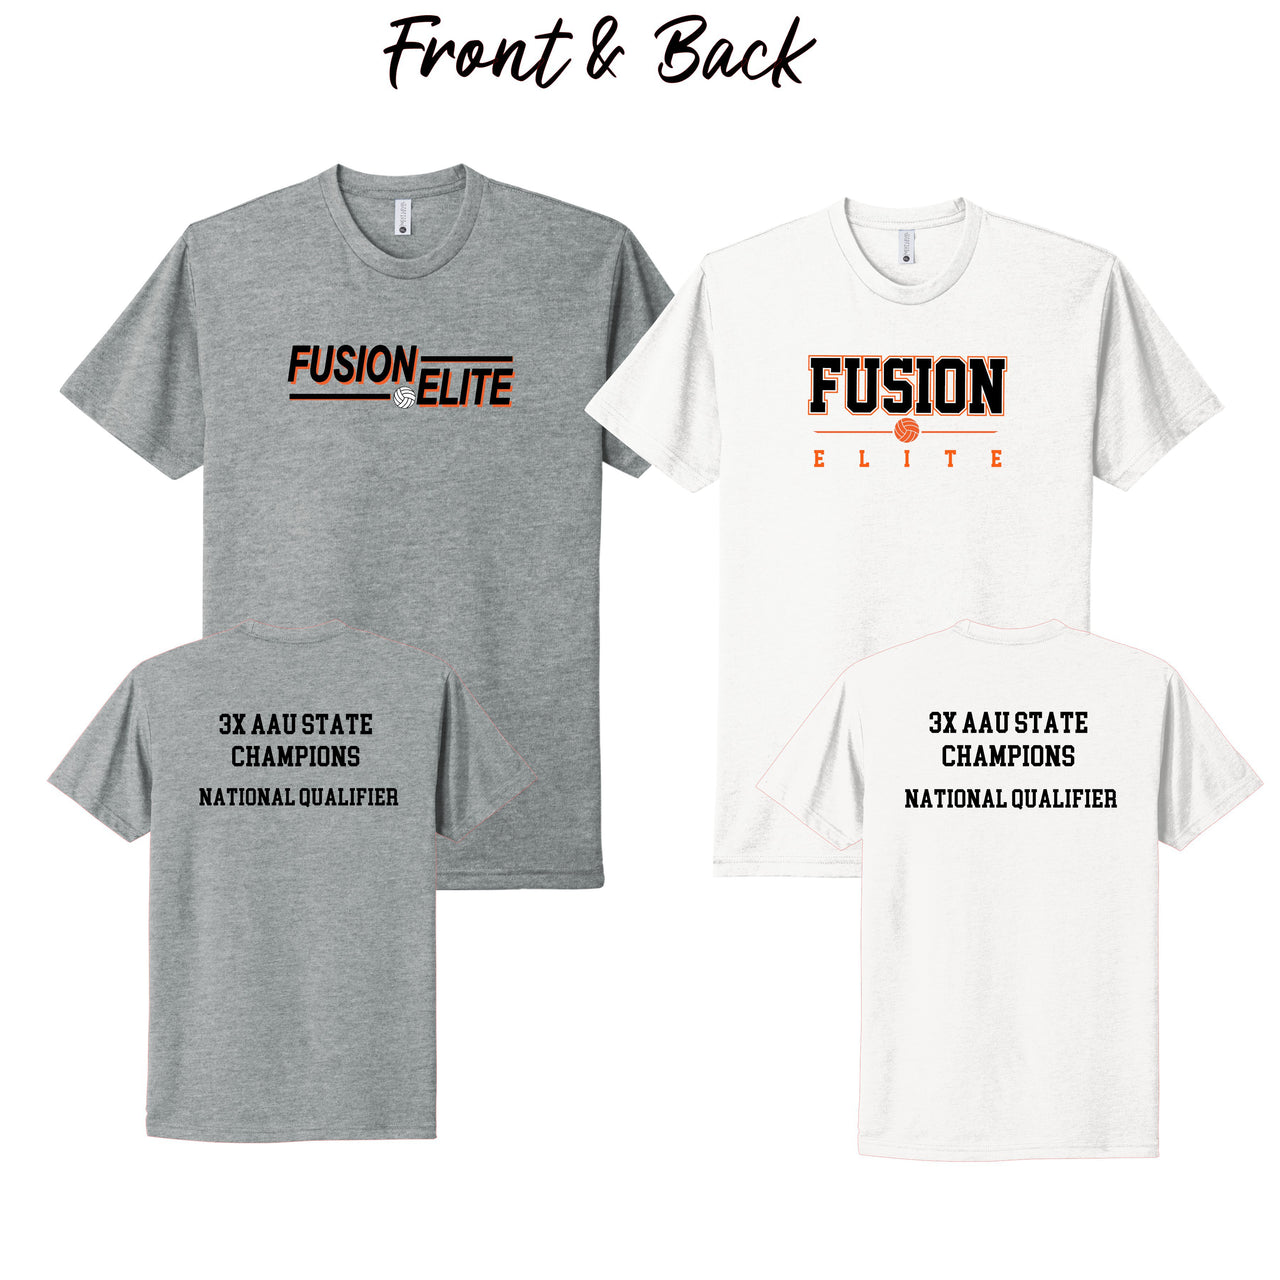 Adult & Youth -Bella Unisex Tee - FRONT & BACK (Fusion Elite)